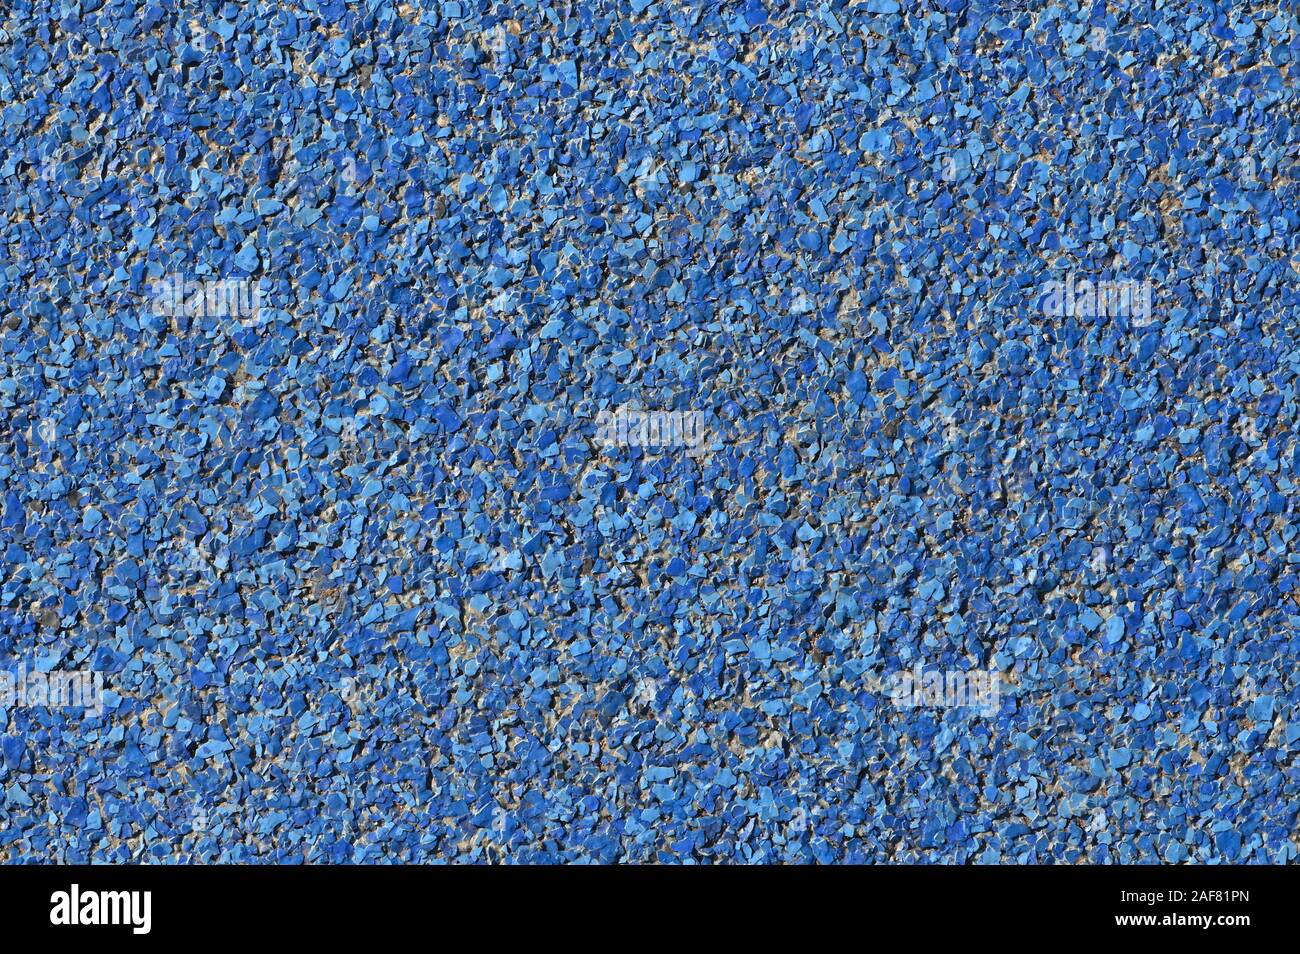 abstract blue background paving consisting of small pebbles embedded in cement exterior floor or road design Stock Photo